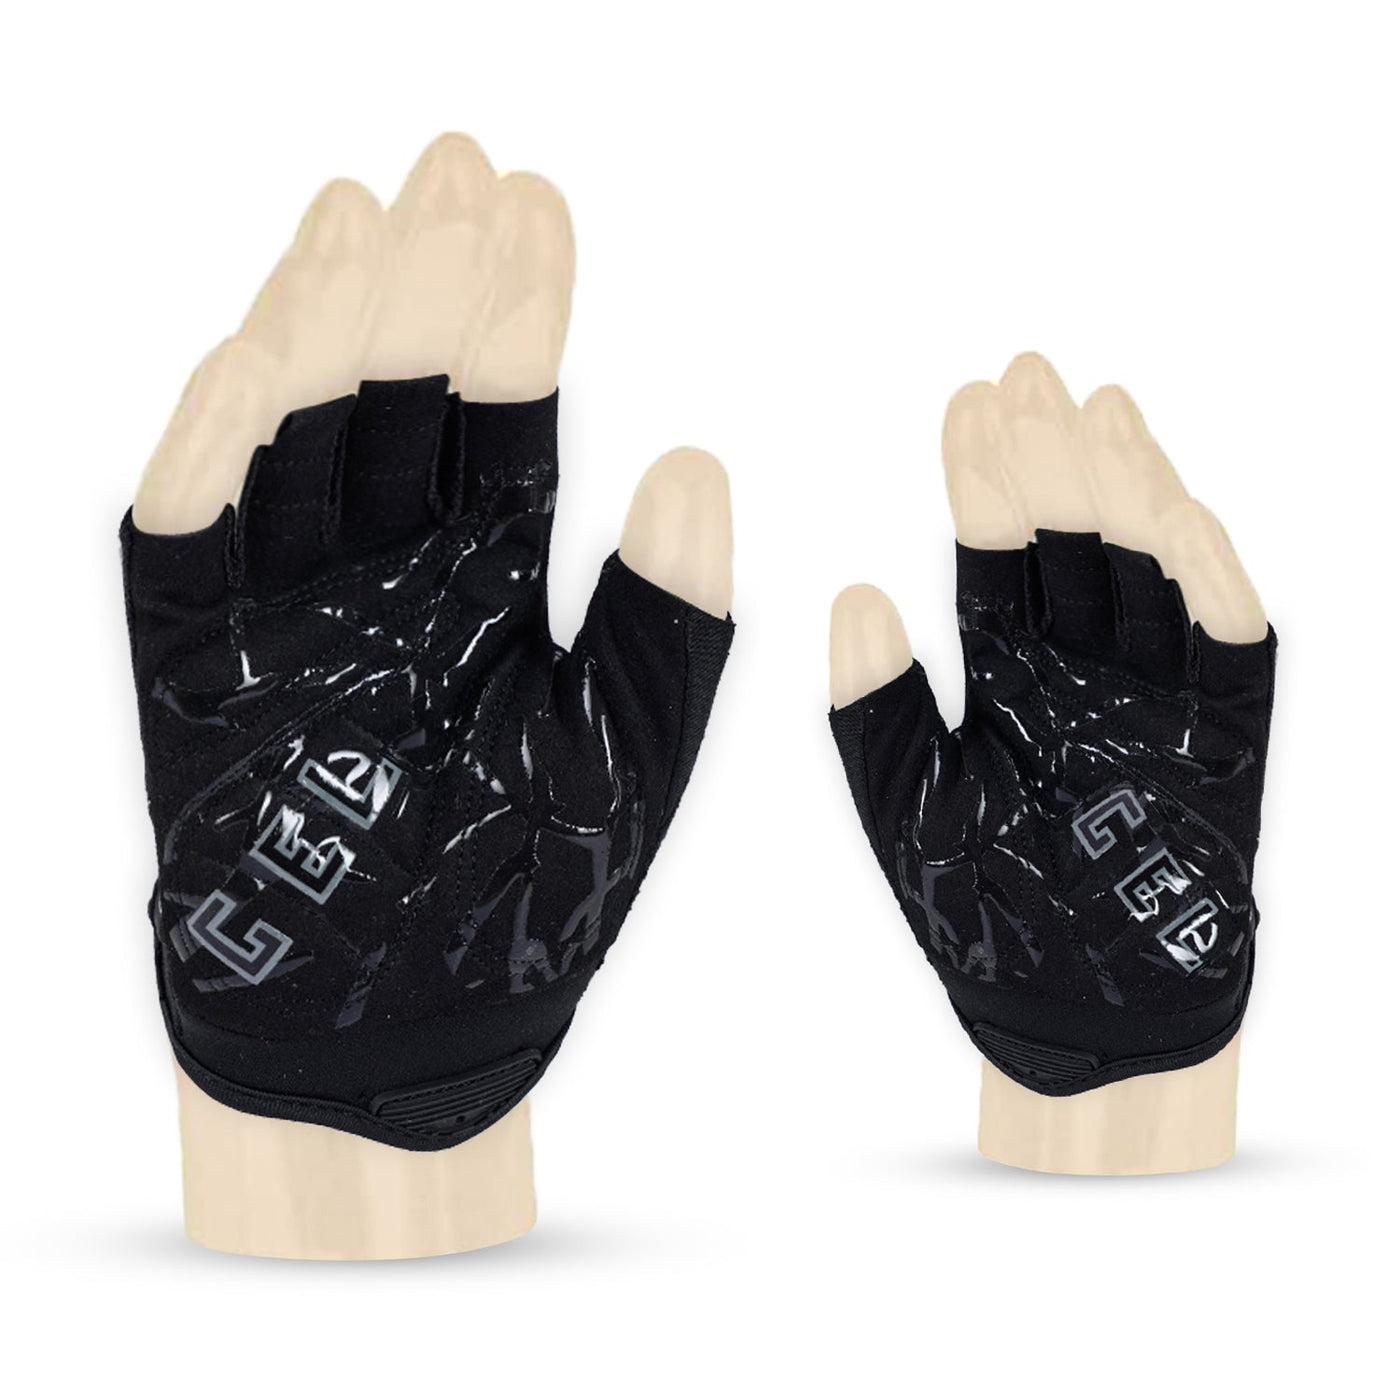 ZAKPRO Gel Series Anti-Slip Professional Half Finger Cycling Gloves - Black - Cyclop.in